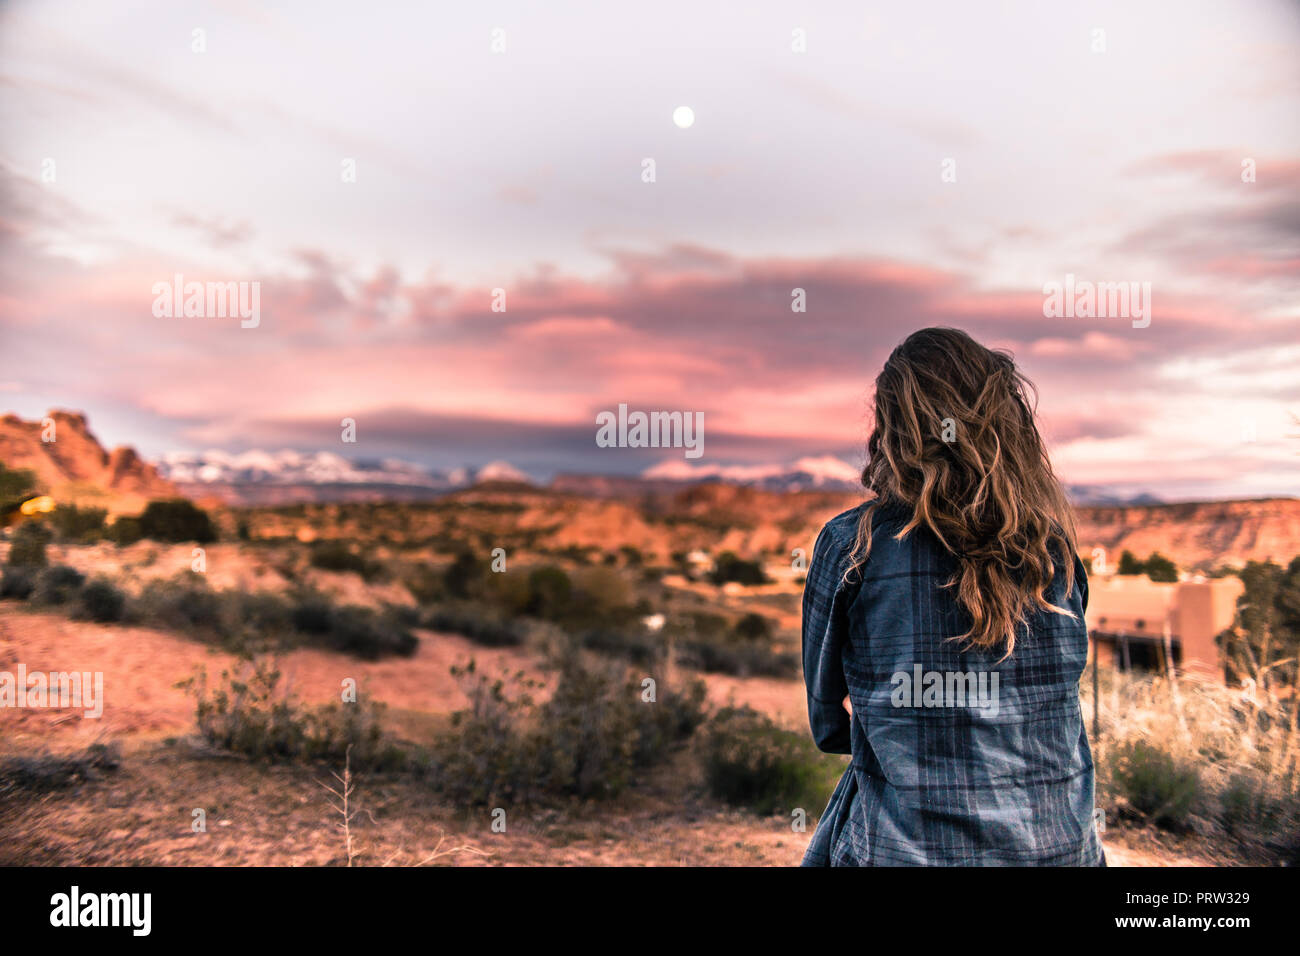 Woman looking at sunset in the desert, Moab, Utah Stock Photo